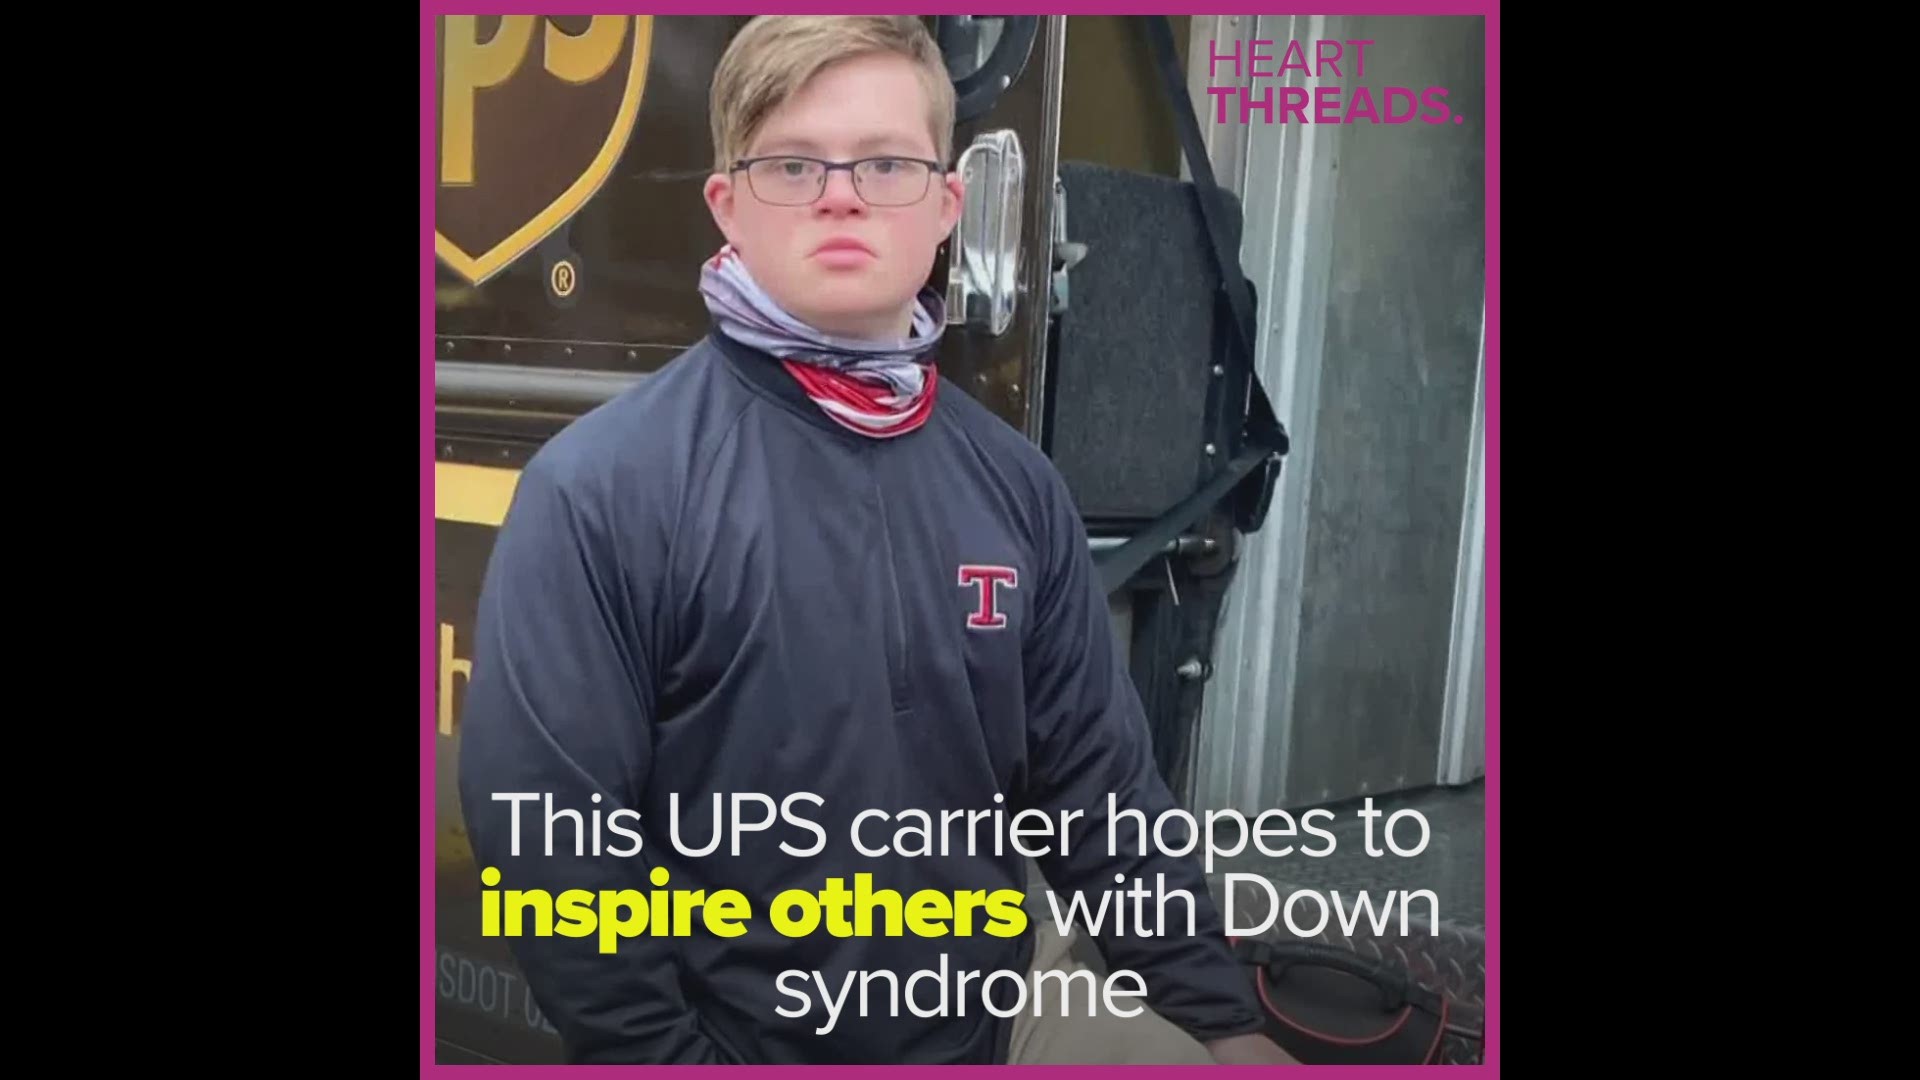 Down syndrome has never held Jake back, and work is no different.